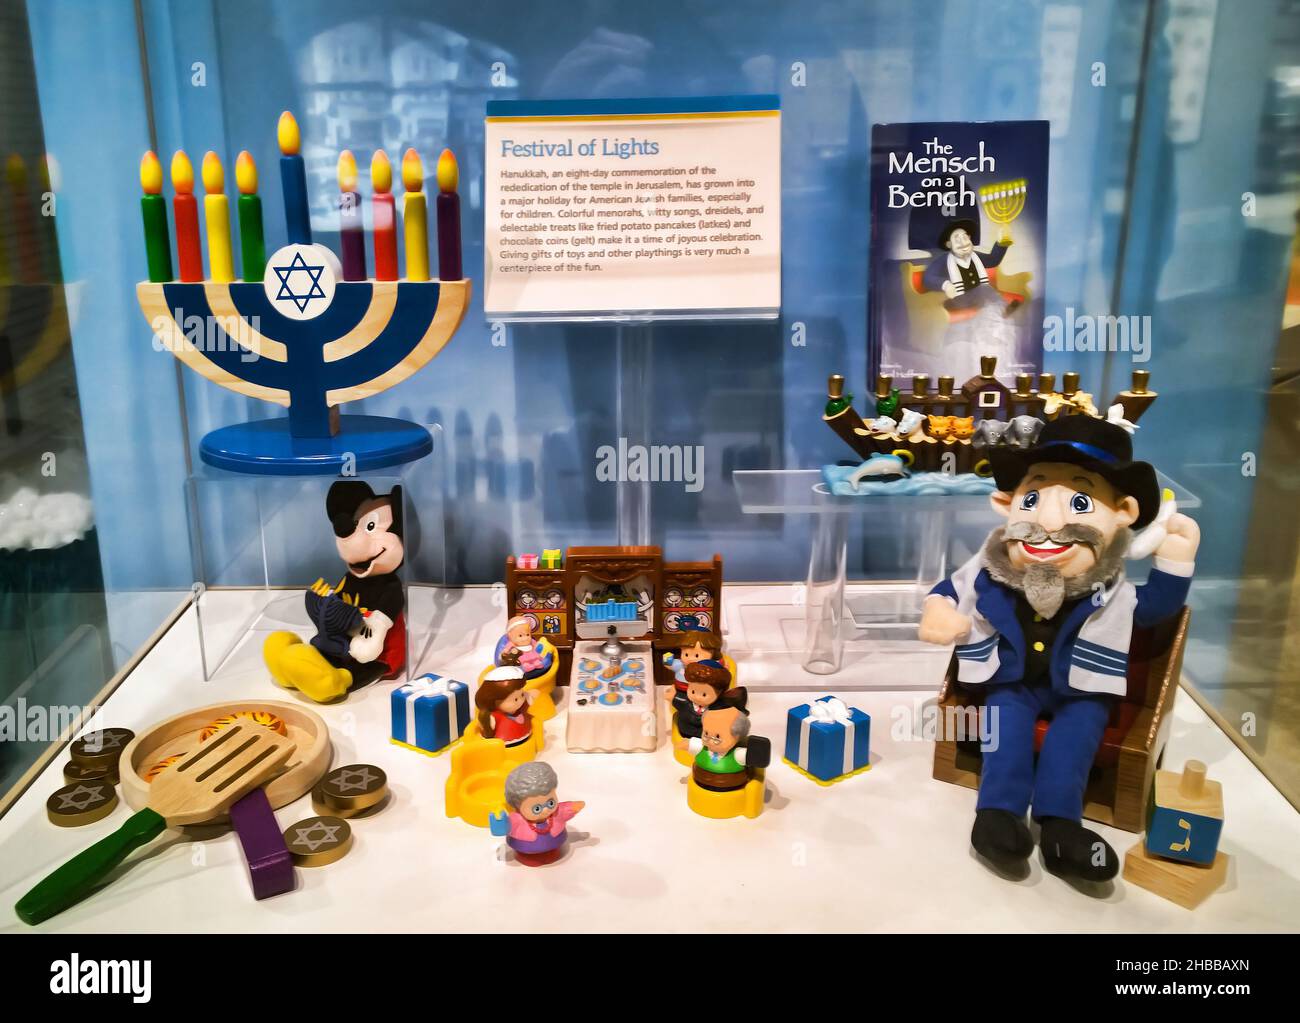 Rochester, New York, USA. December 16, 2021. The Mensch on a Bench display at the Strong National Museum of Play in Rochester, New York Stock Photo